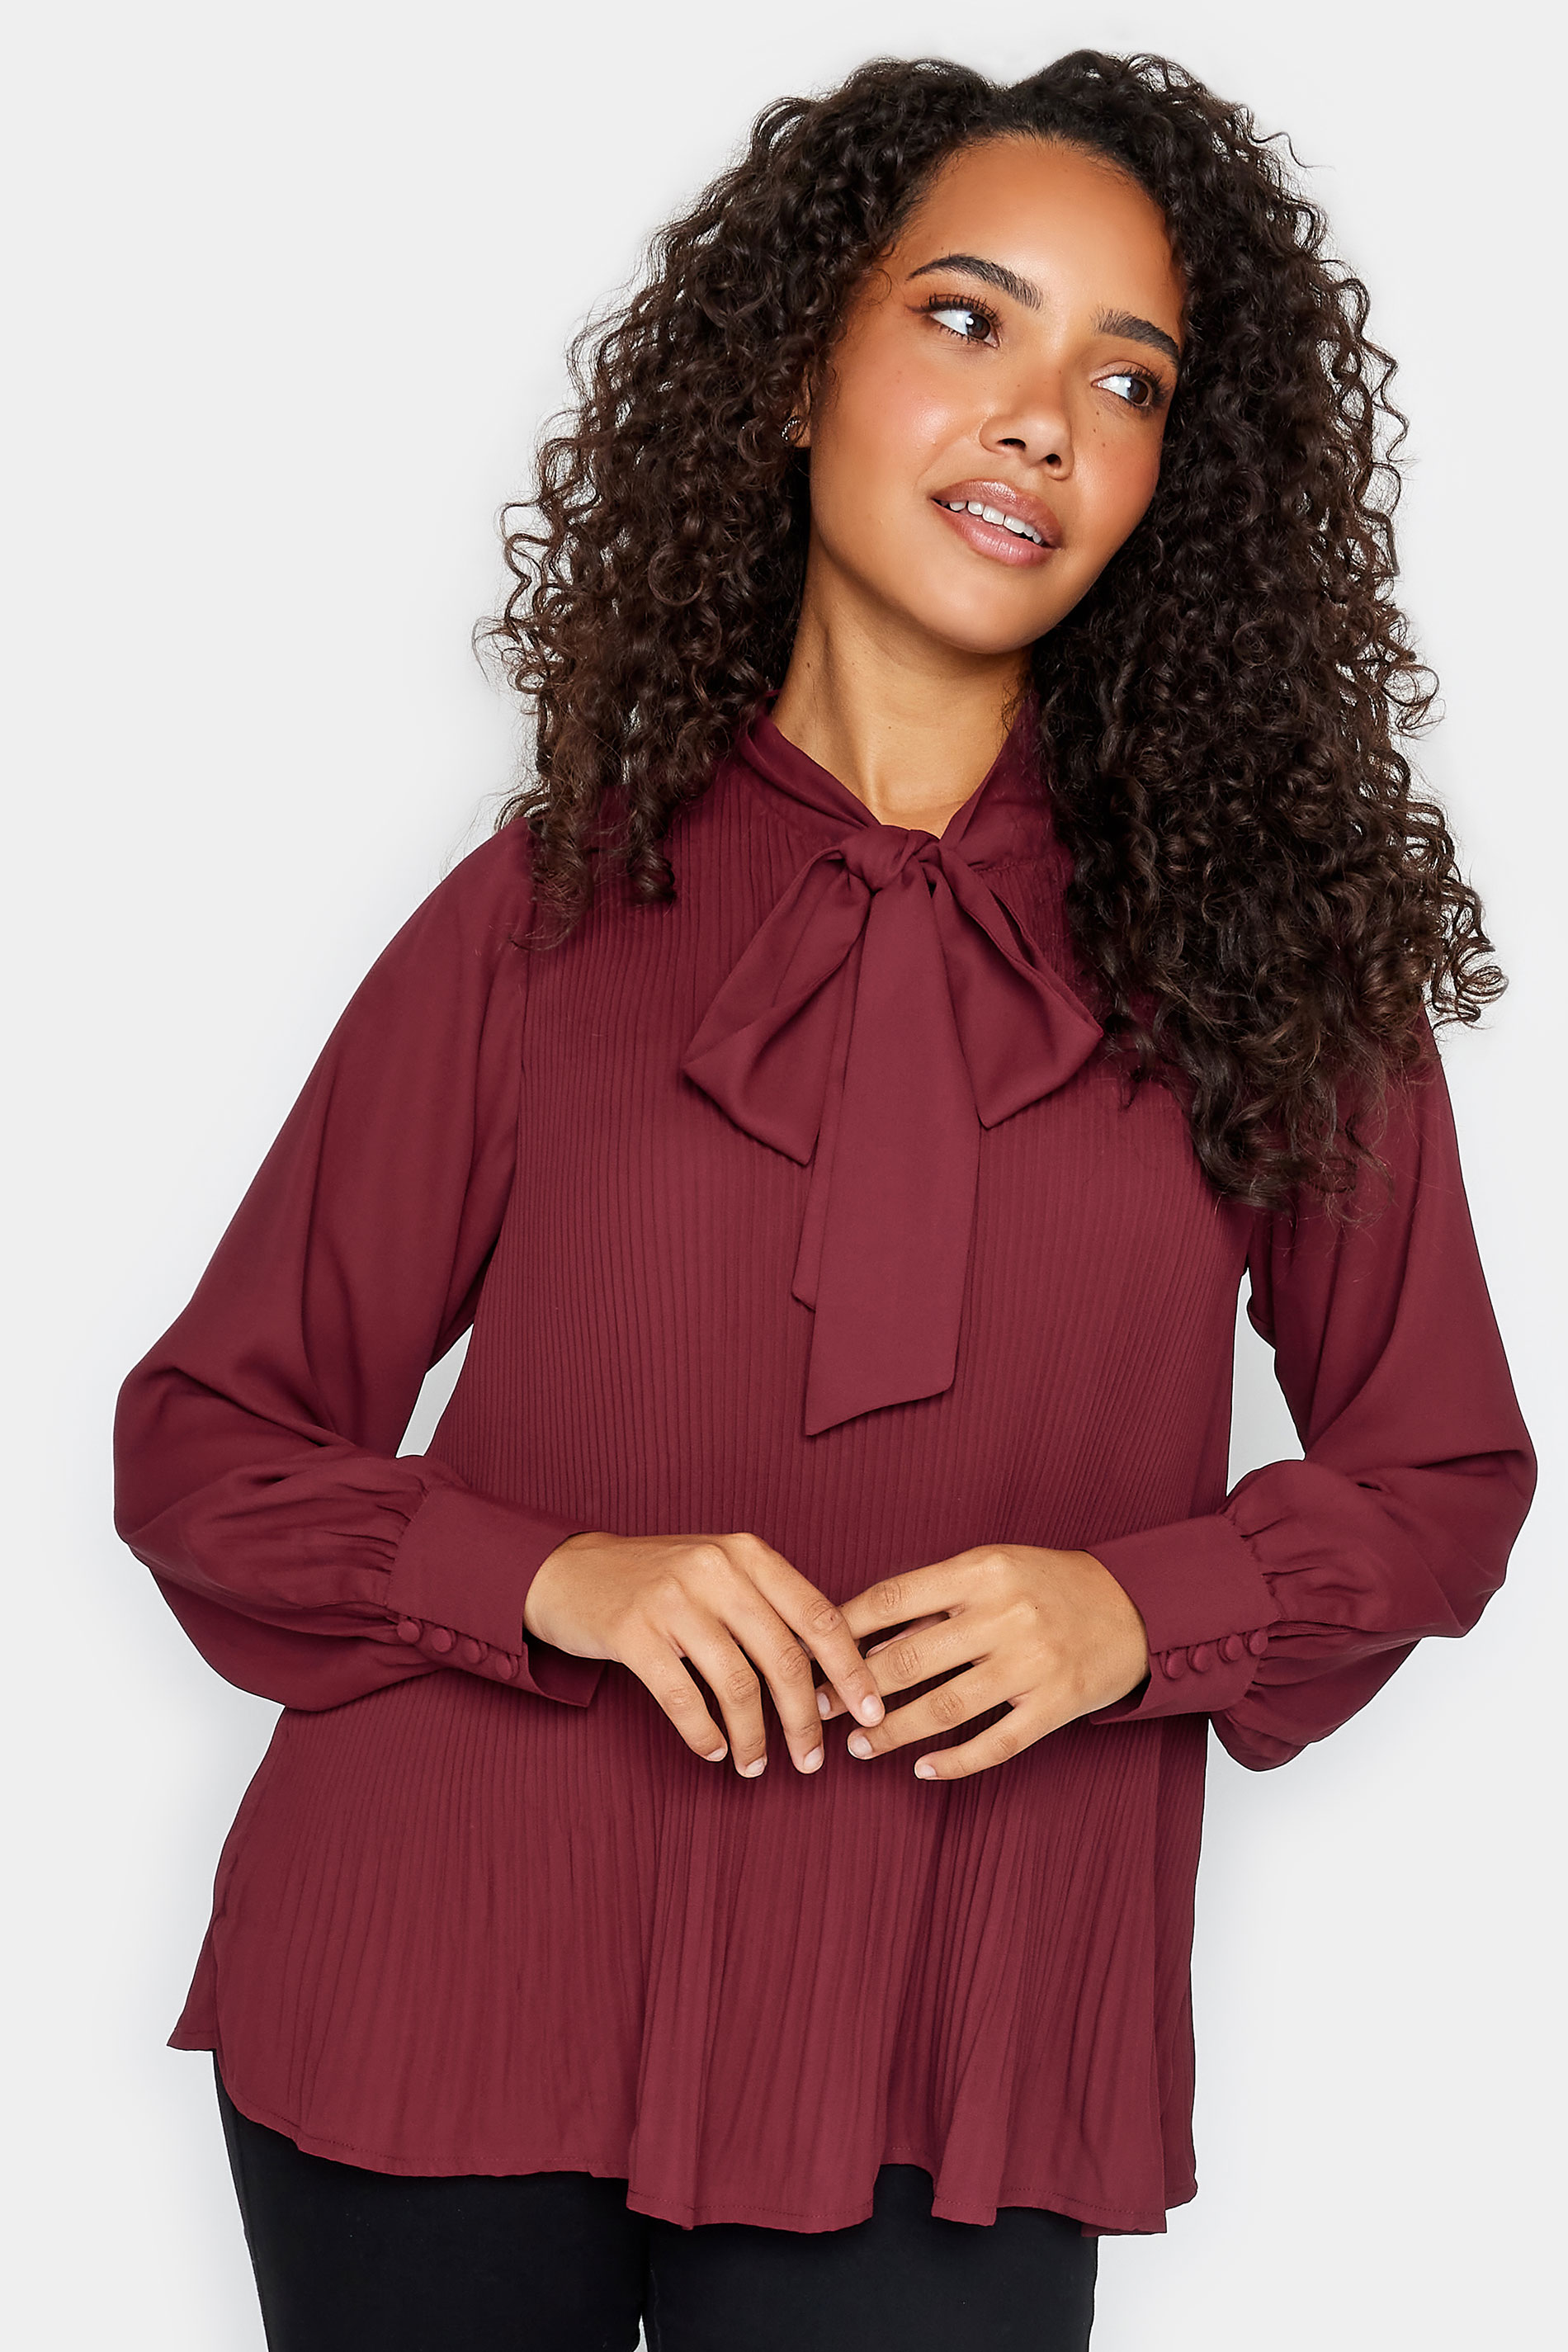 M&Co Burgundy Red Pleated Bow Neck Blouse | M&Co 1